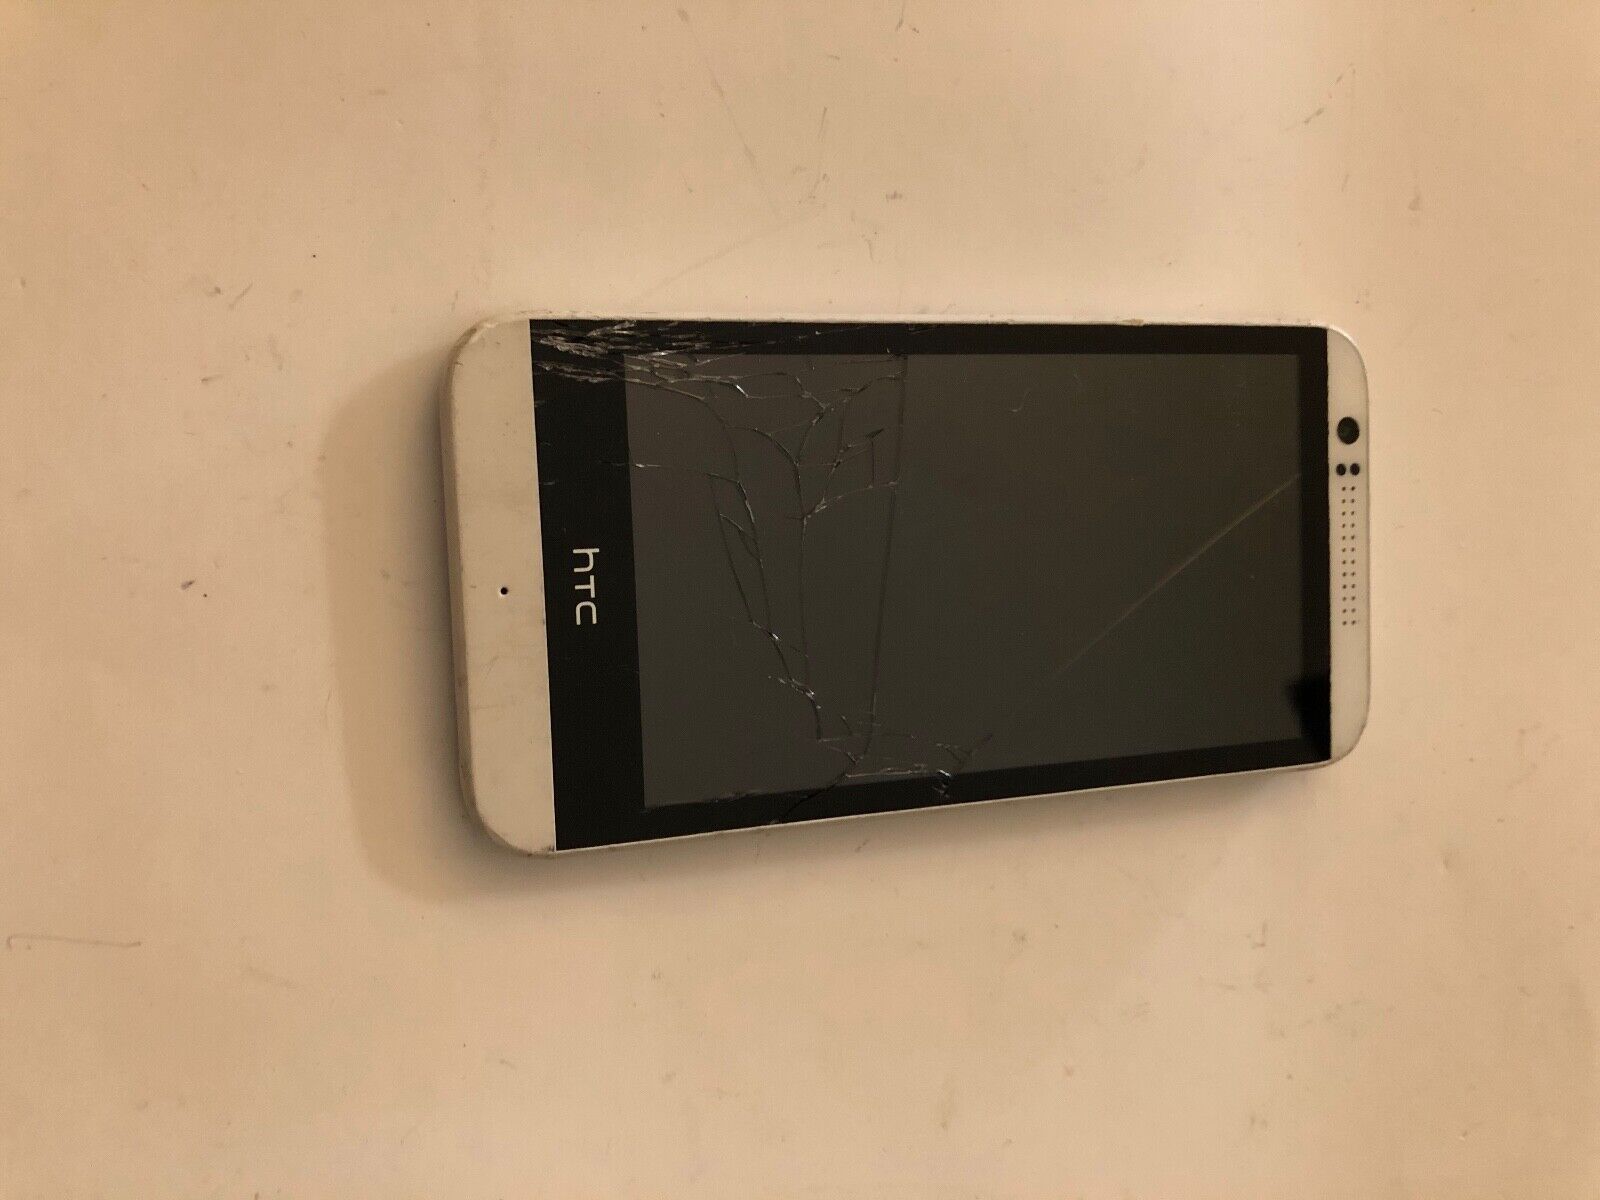 HTC Desire 510 White Boost Mobile Android Phone, Cracked glass - read HTC HTC Desire 510 - фотография #3